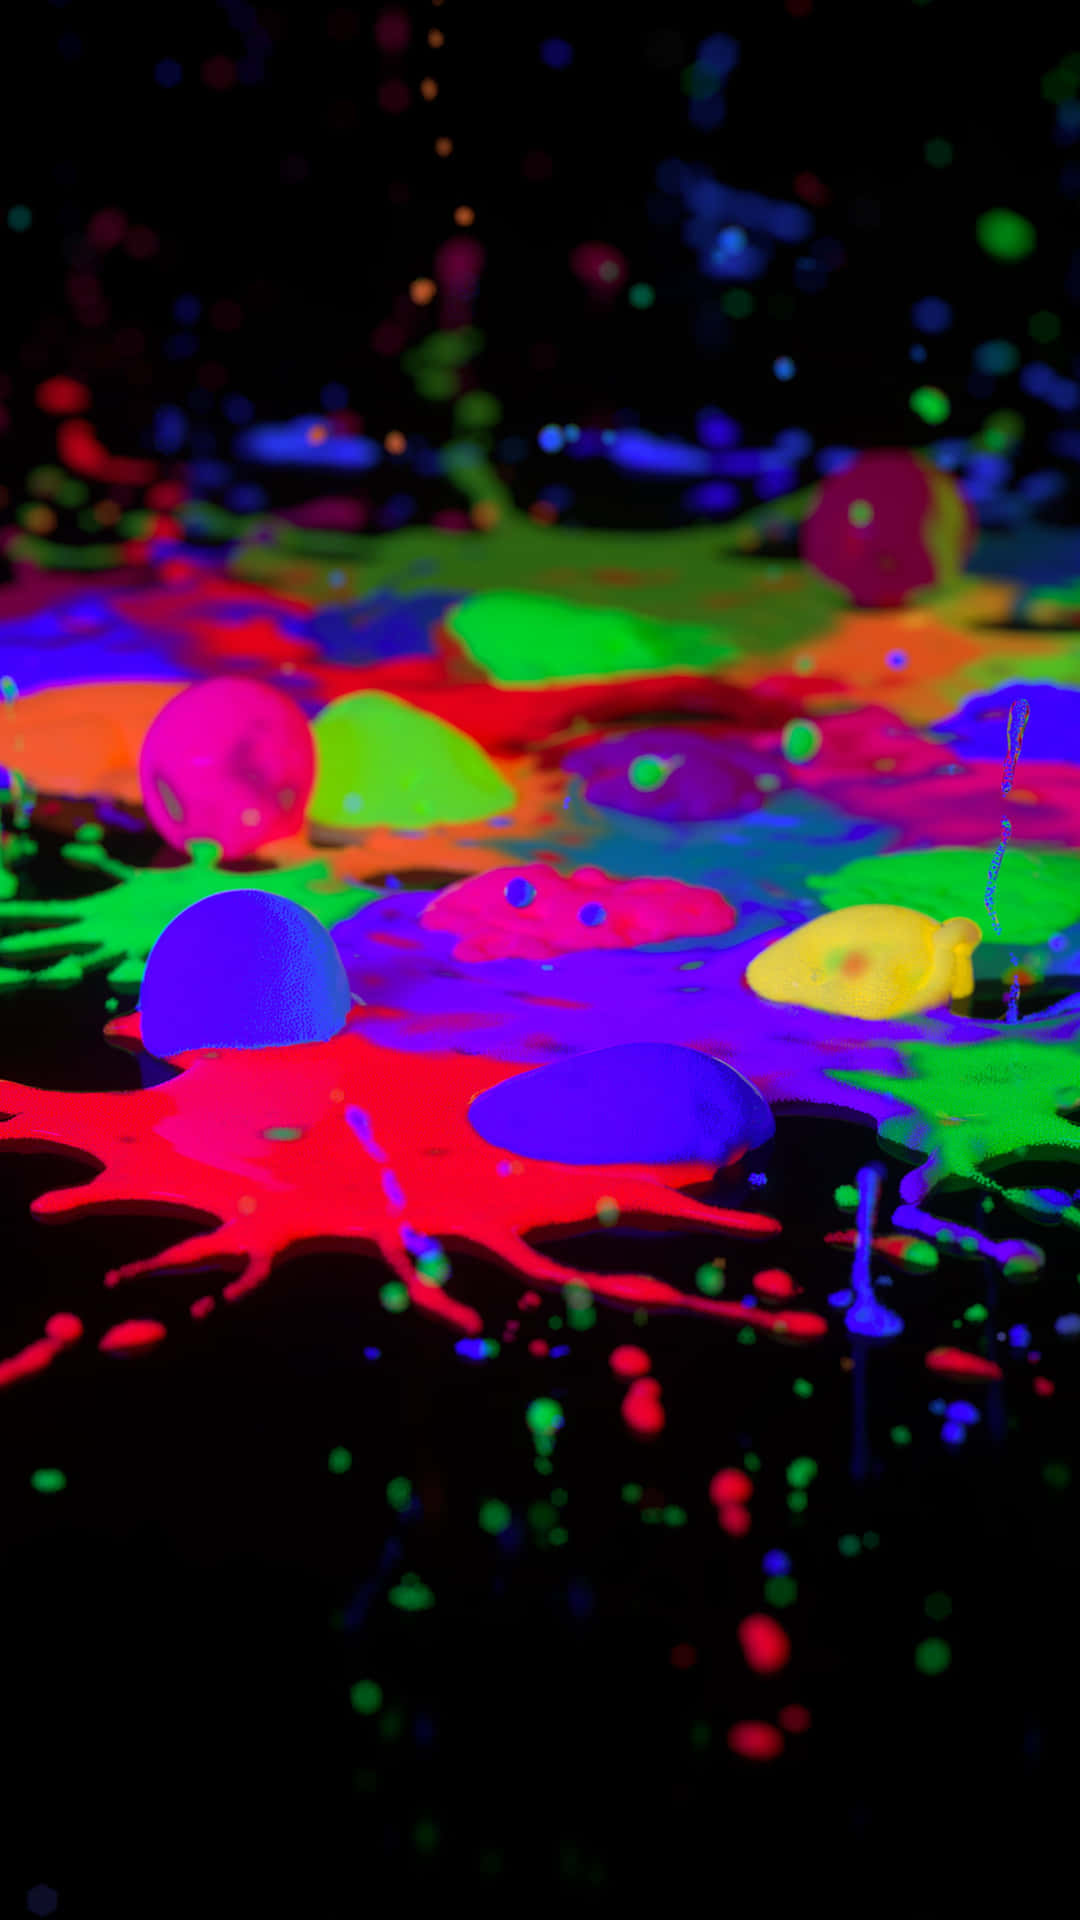 A vibrant array of glowing neon colors Wallpaper